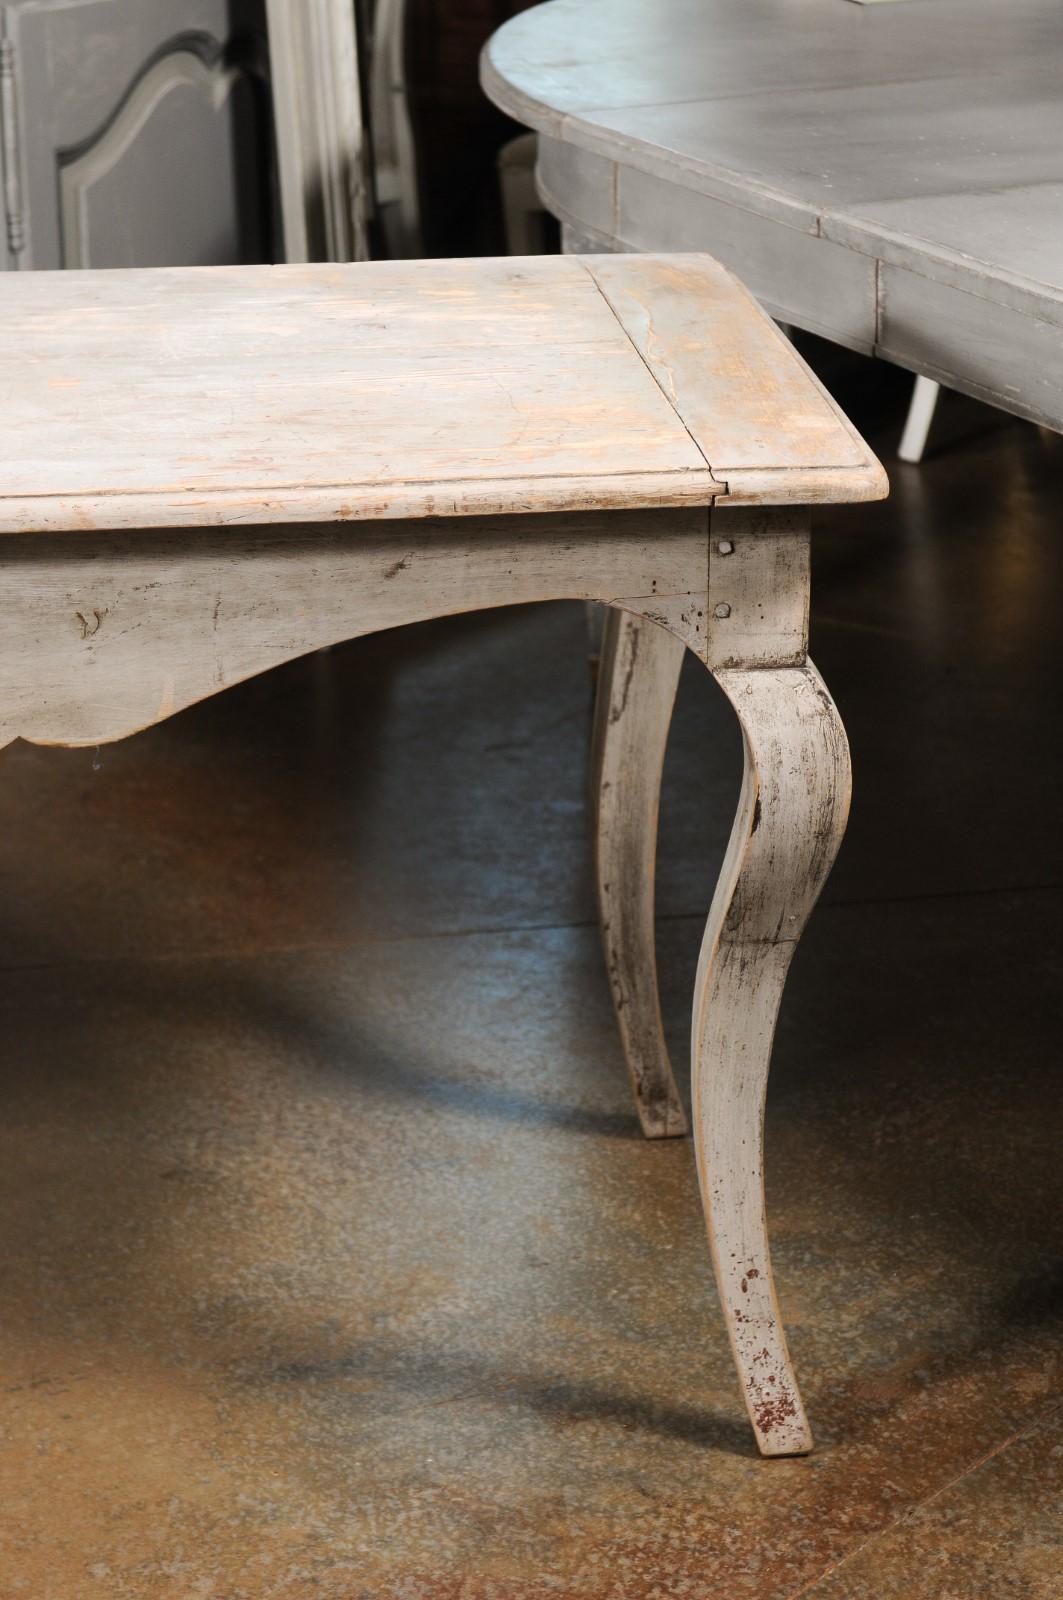 French 1730s Régence Painted Console Table with Carved Apron and Cabriole Legs For Sale 9